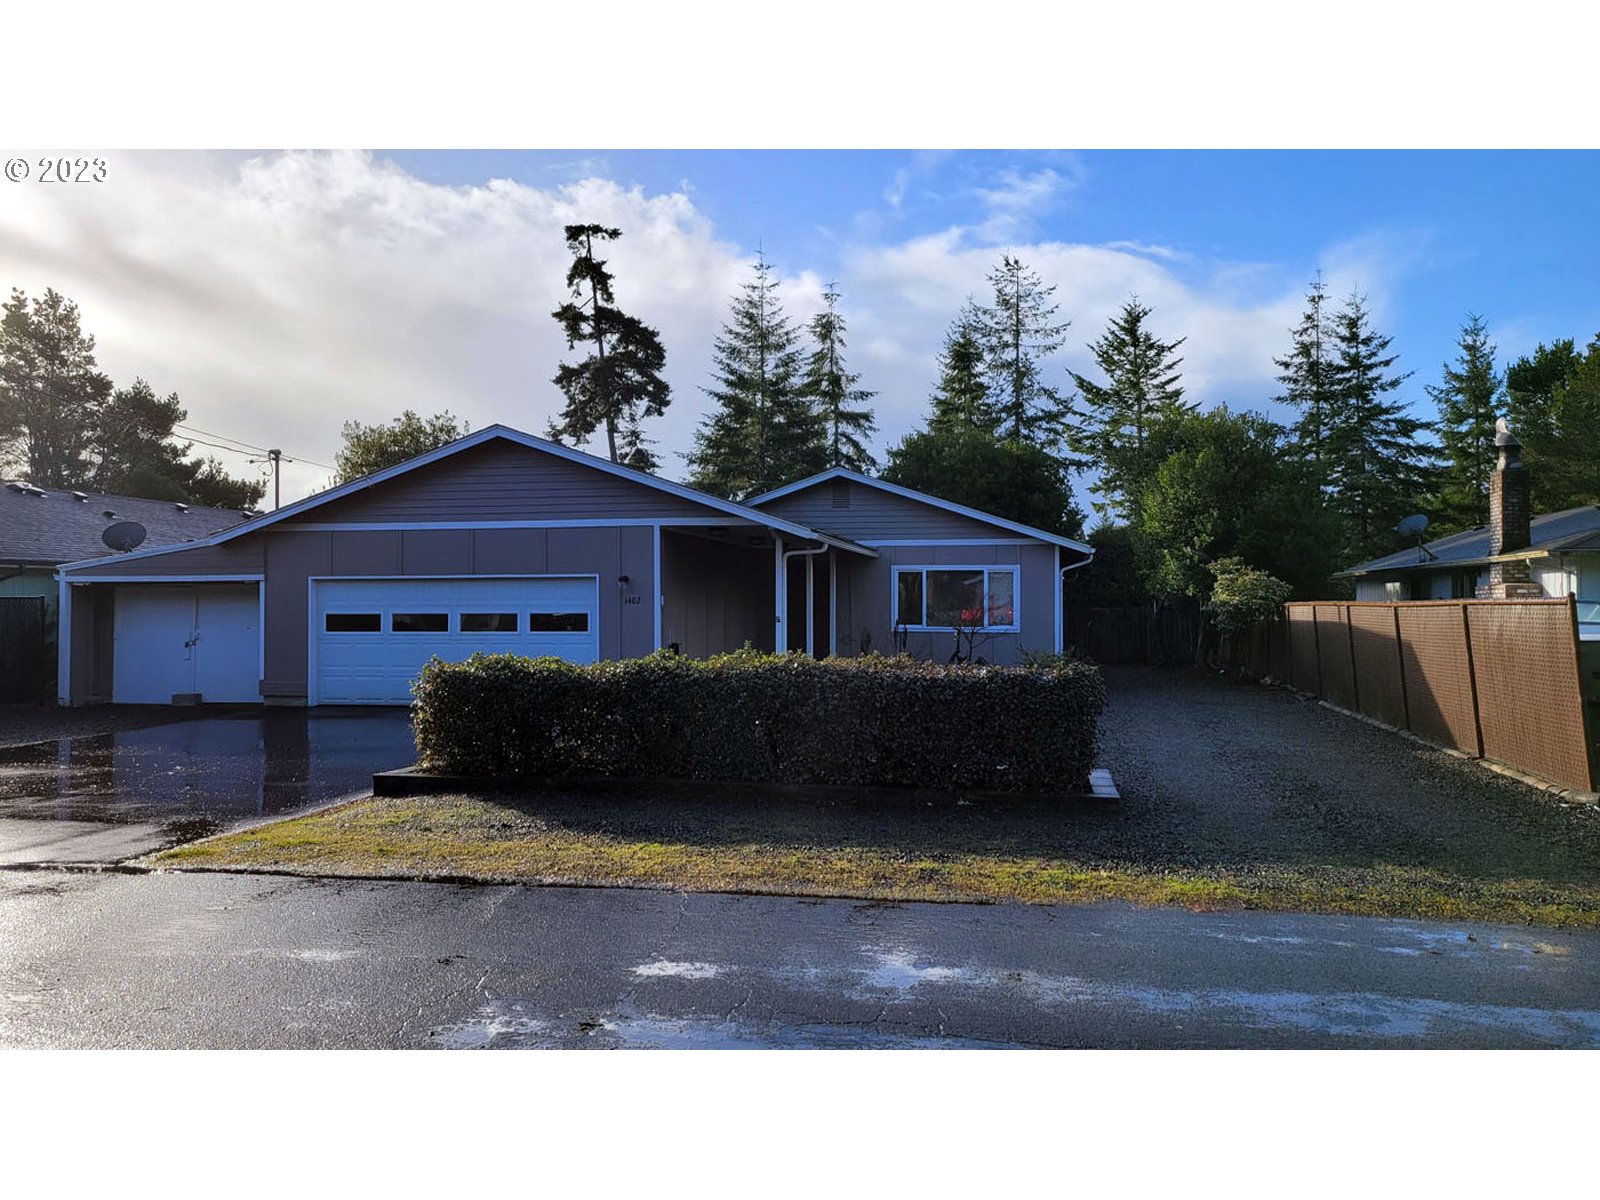 1402 20TH ST, Florence, OR 97439